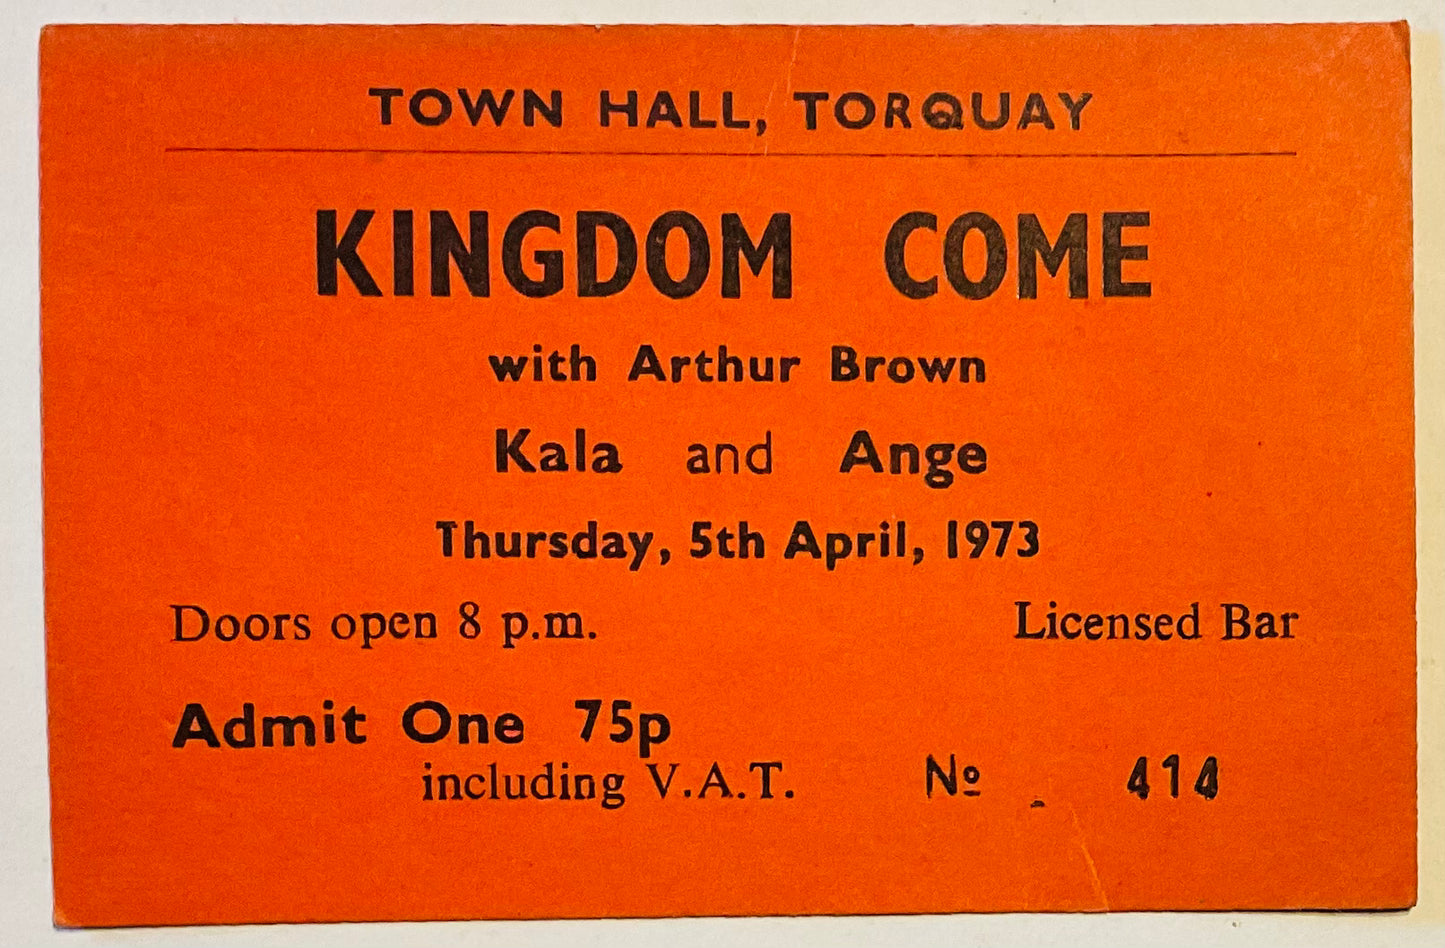 Kingdom Come with Arthur Brown Original Unused Concert Ticket Town Hall Torquay 5th Apr 1973